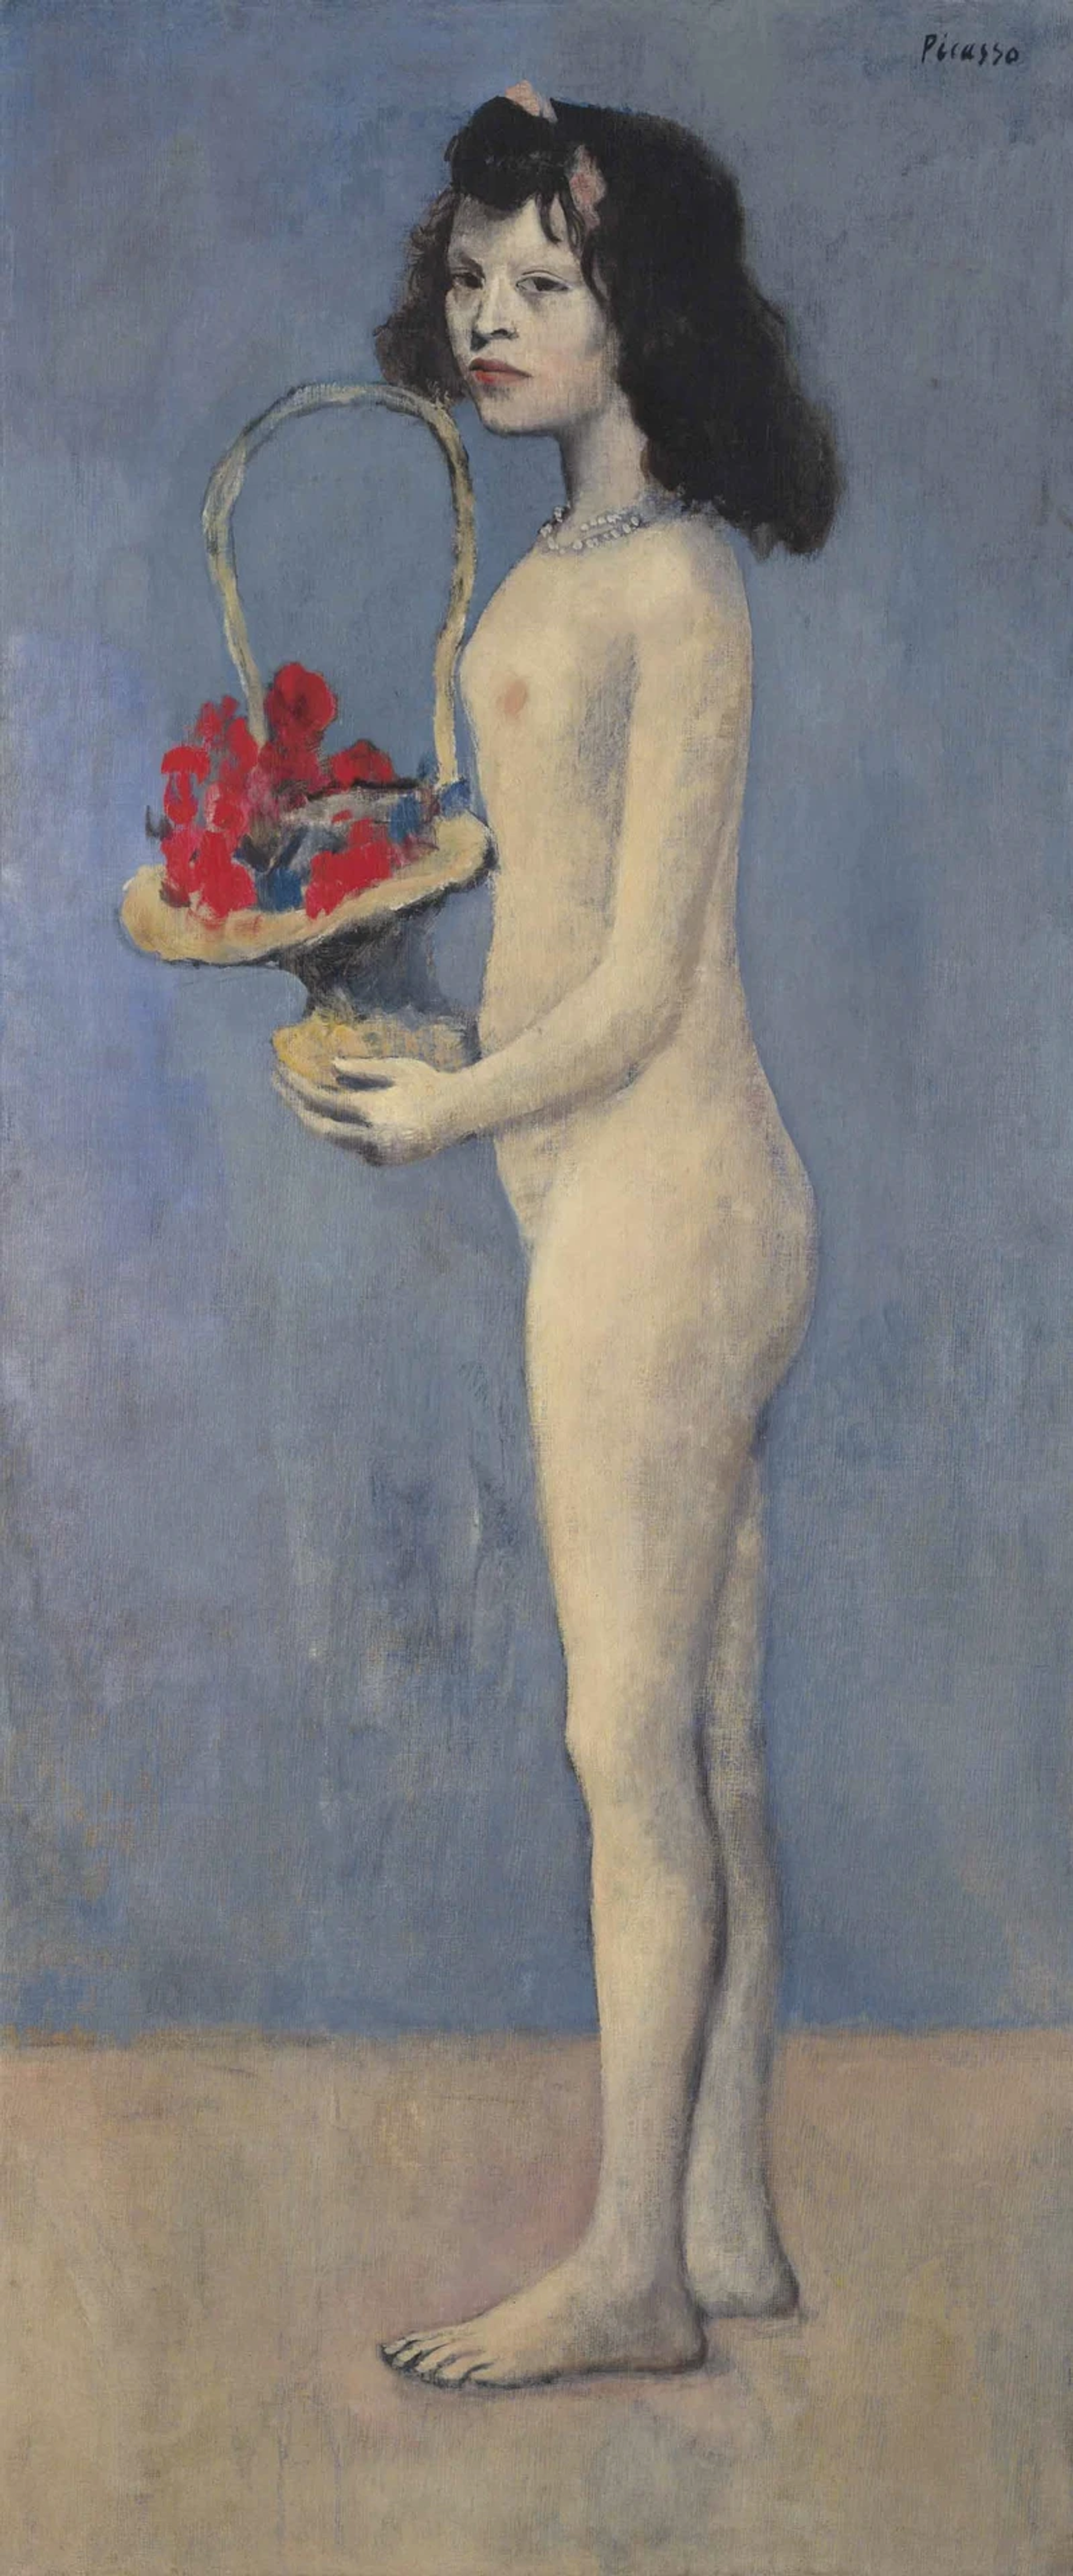 Painting by Pablo Picasso of a nude girl, with dark hair, holding red flowers against a powder blue background.